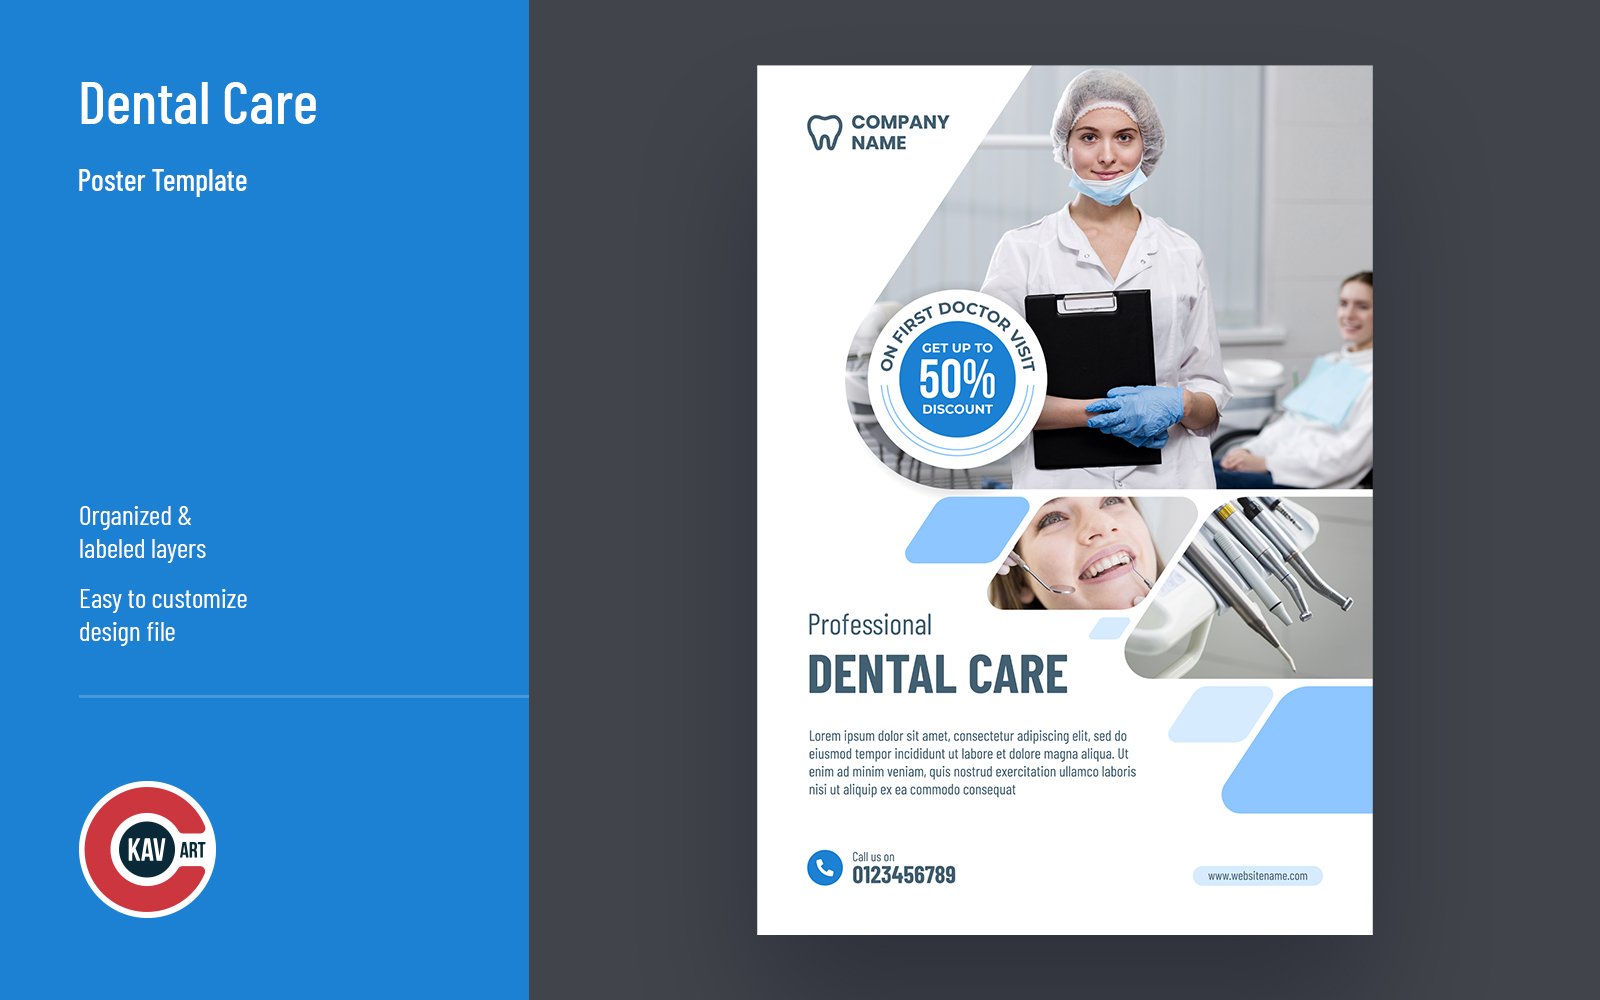 Dental Care Poster Template